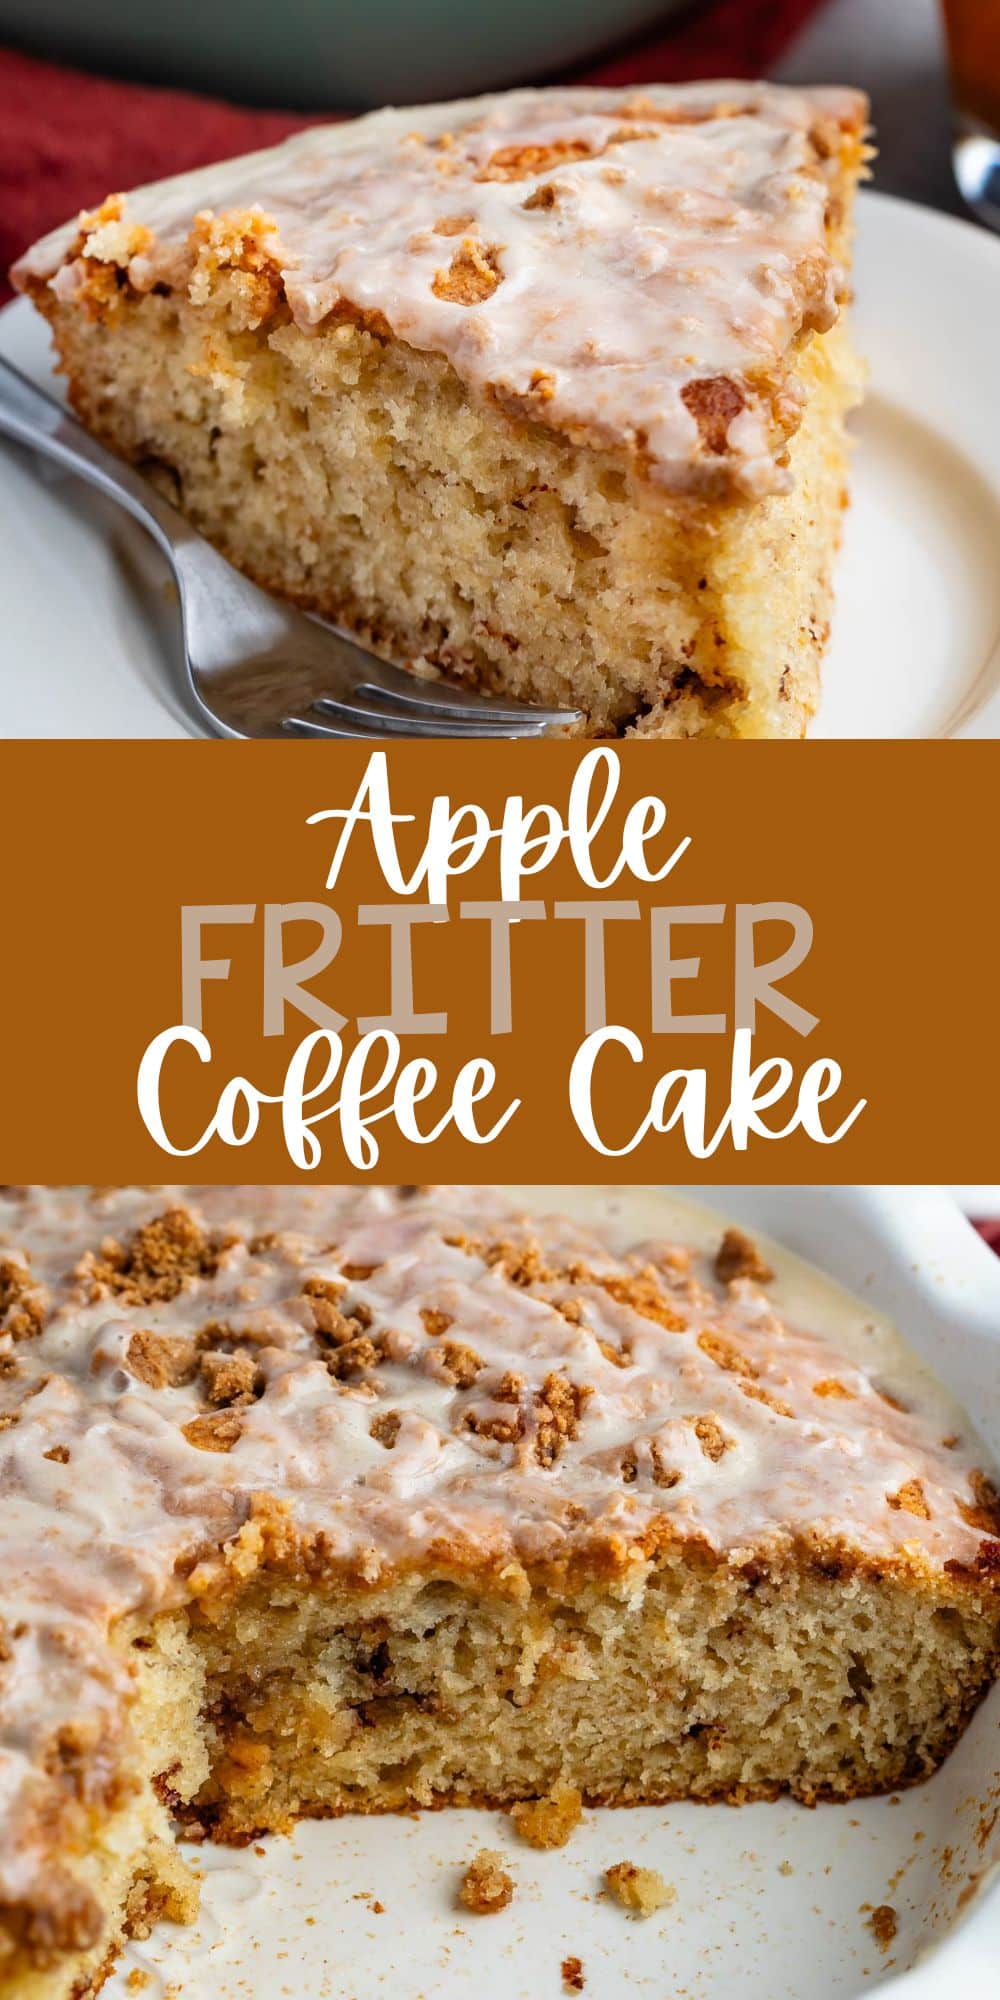 two photos of apple fritter coffee cake in a white pan with glaze on top with words on the image.